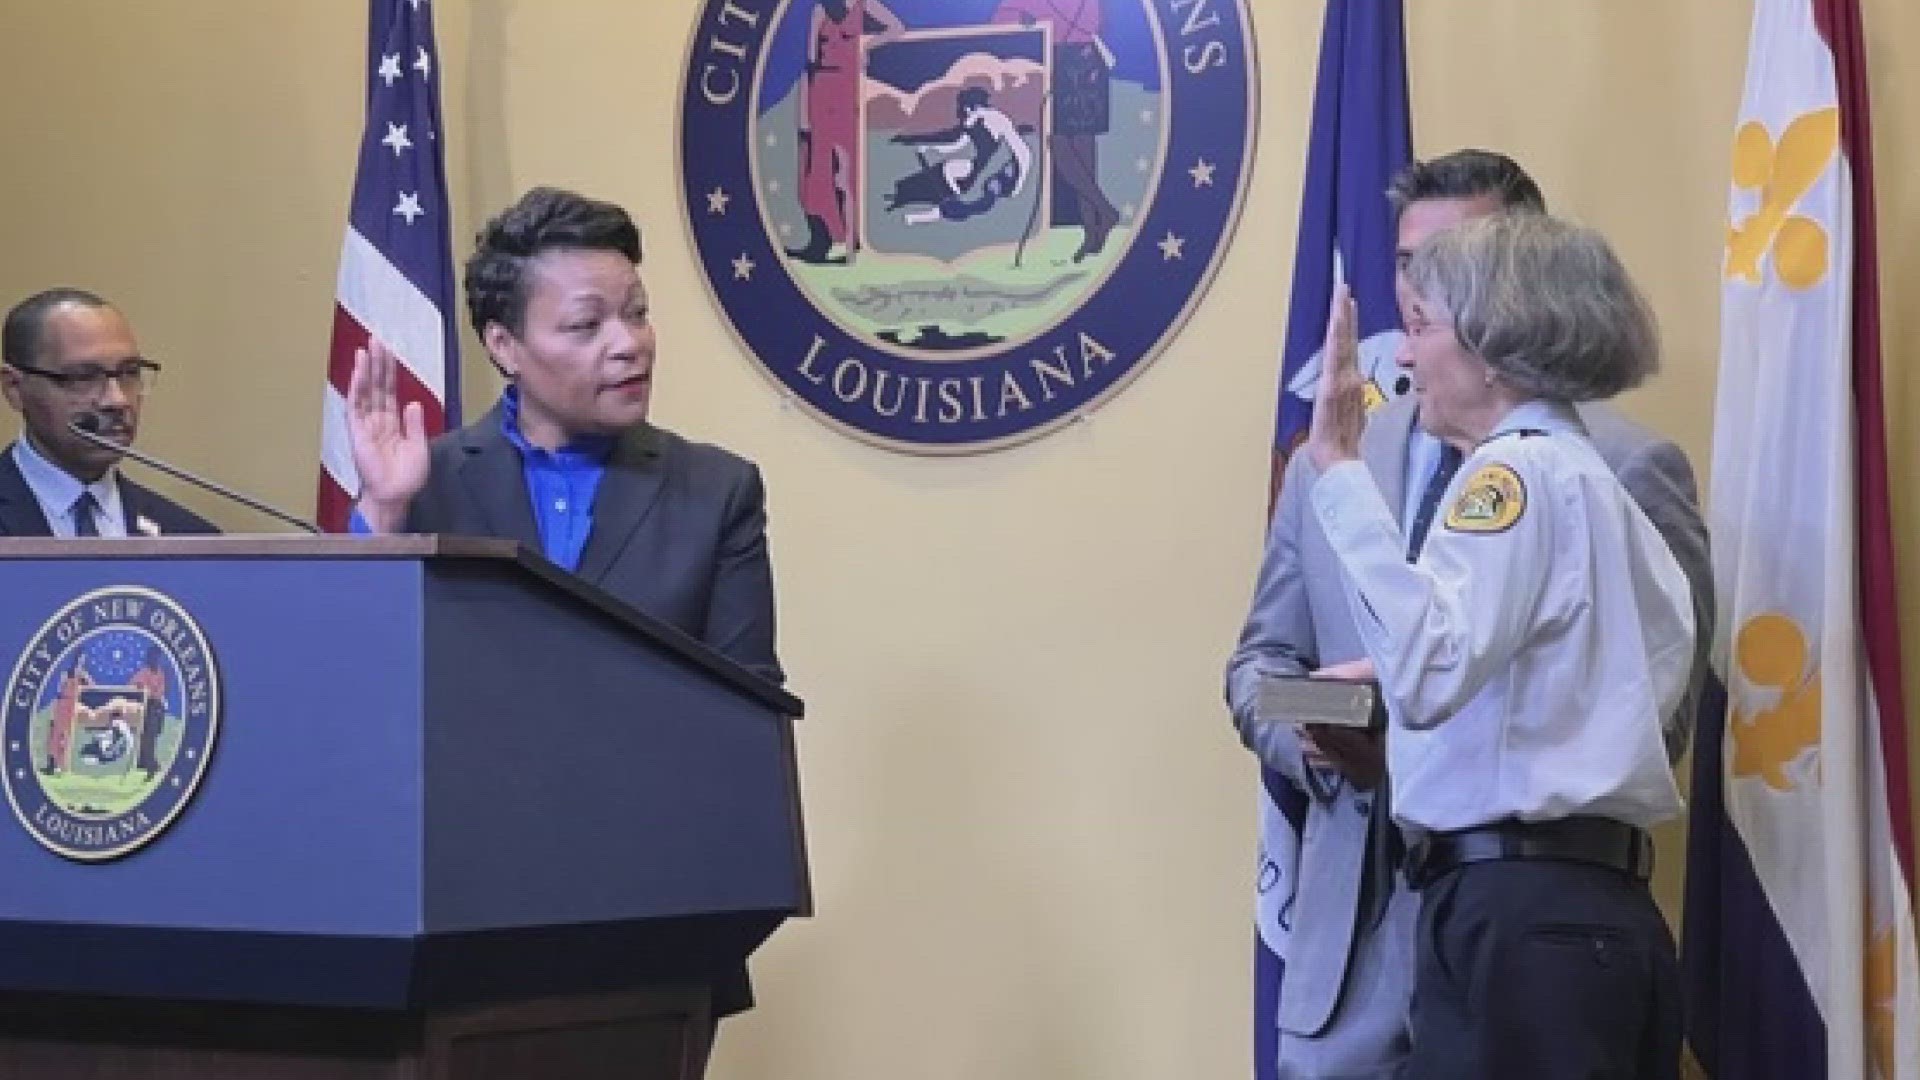 “I would like to thank Mayor Cantrell for having the confidence in me to lead the New Orleans Police Department," said Interim NOPD Superintendent Kirkpatrick. "